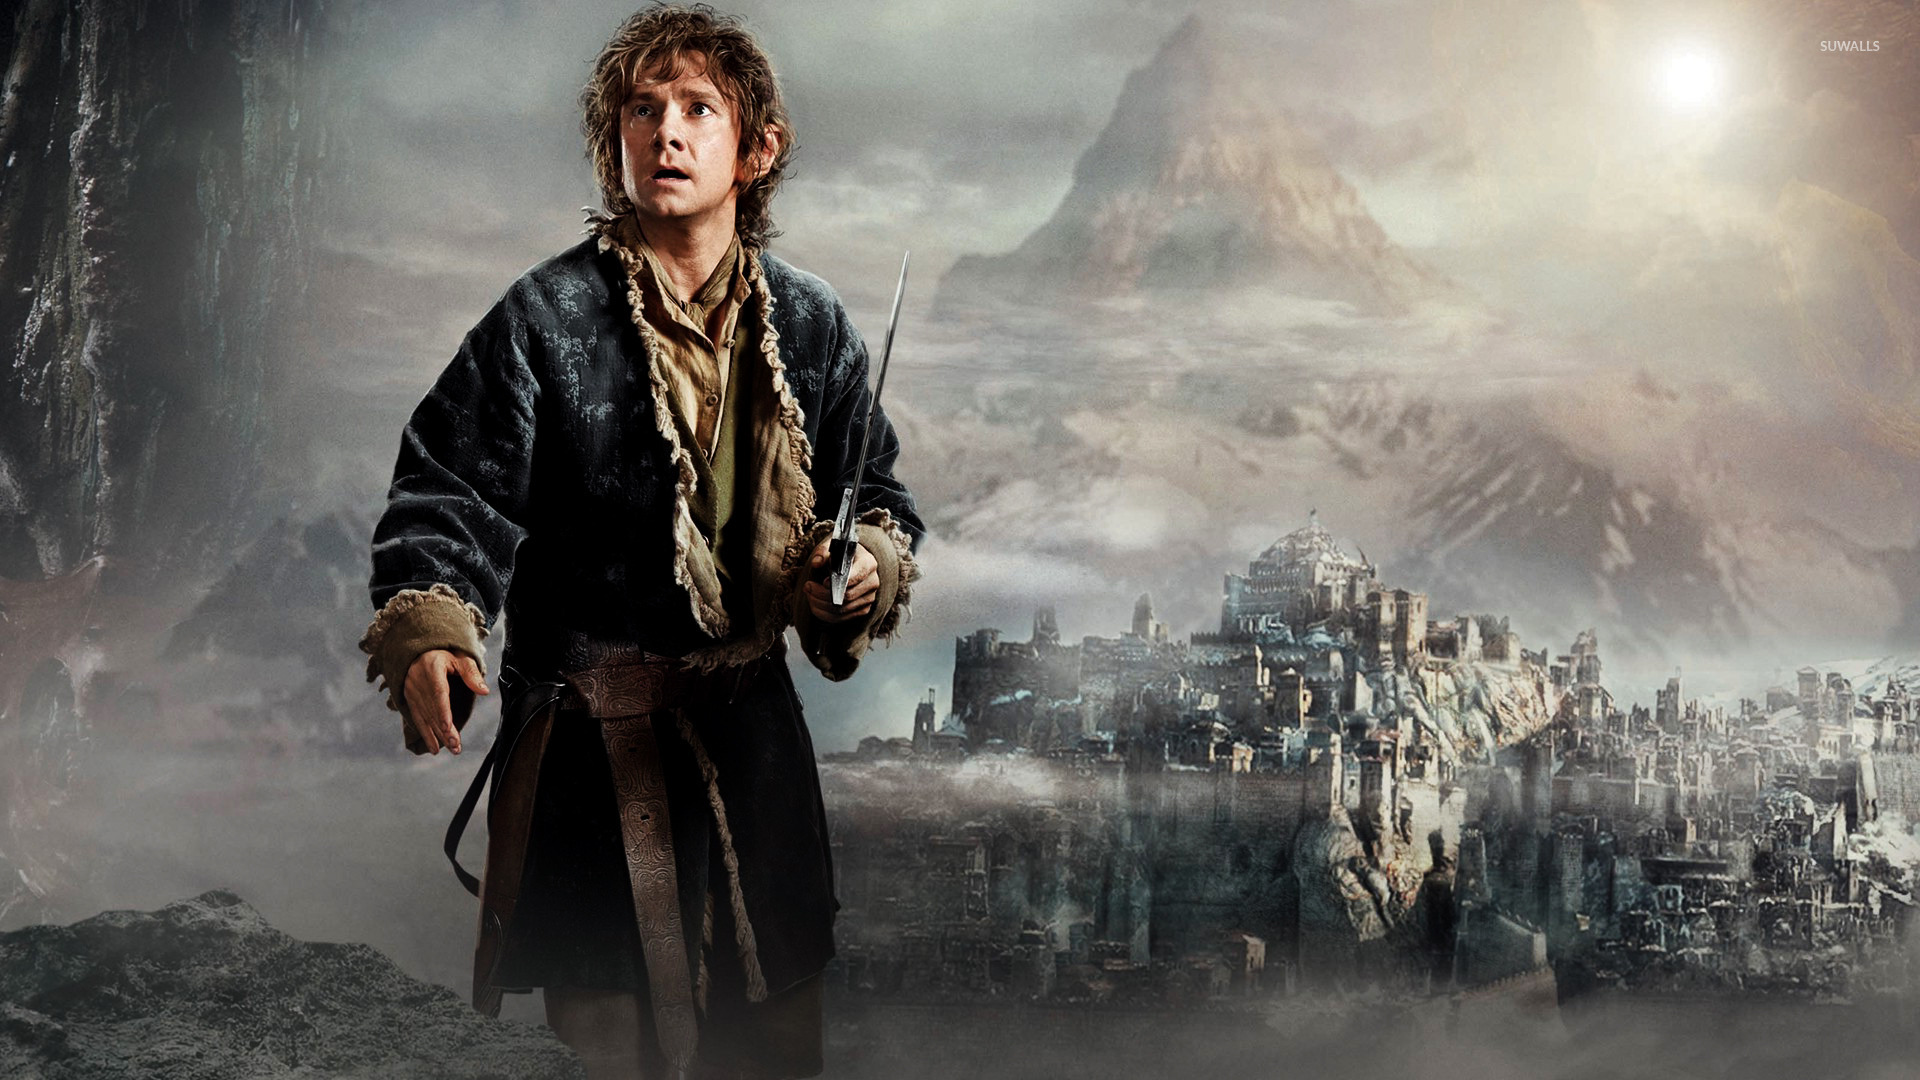 The Hobbit: The Desolation of Smaug free download